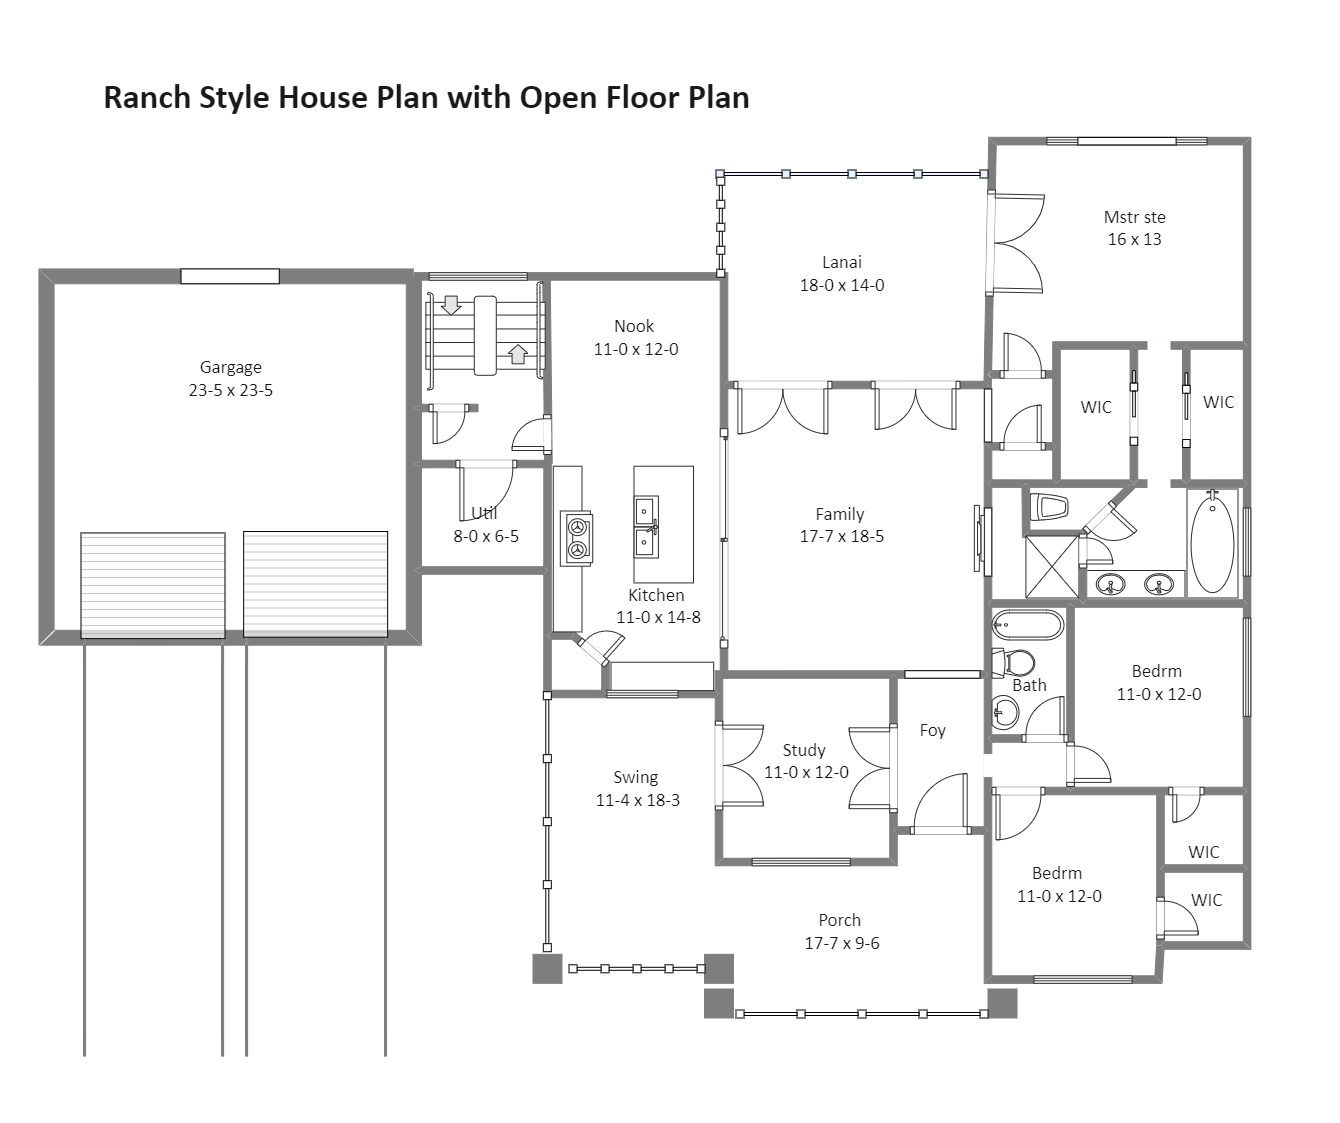 Ranch Style House Plan with Open Floor Plan